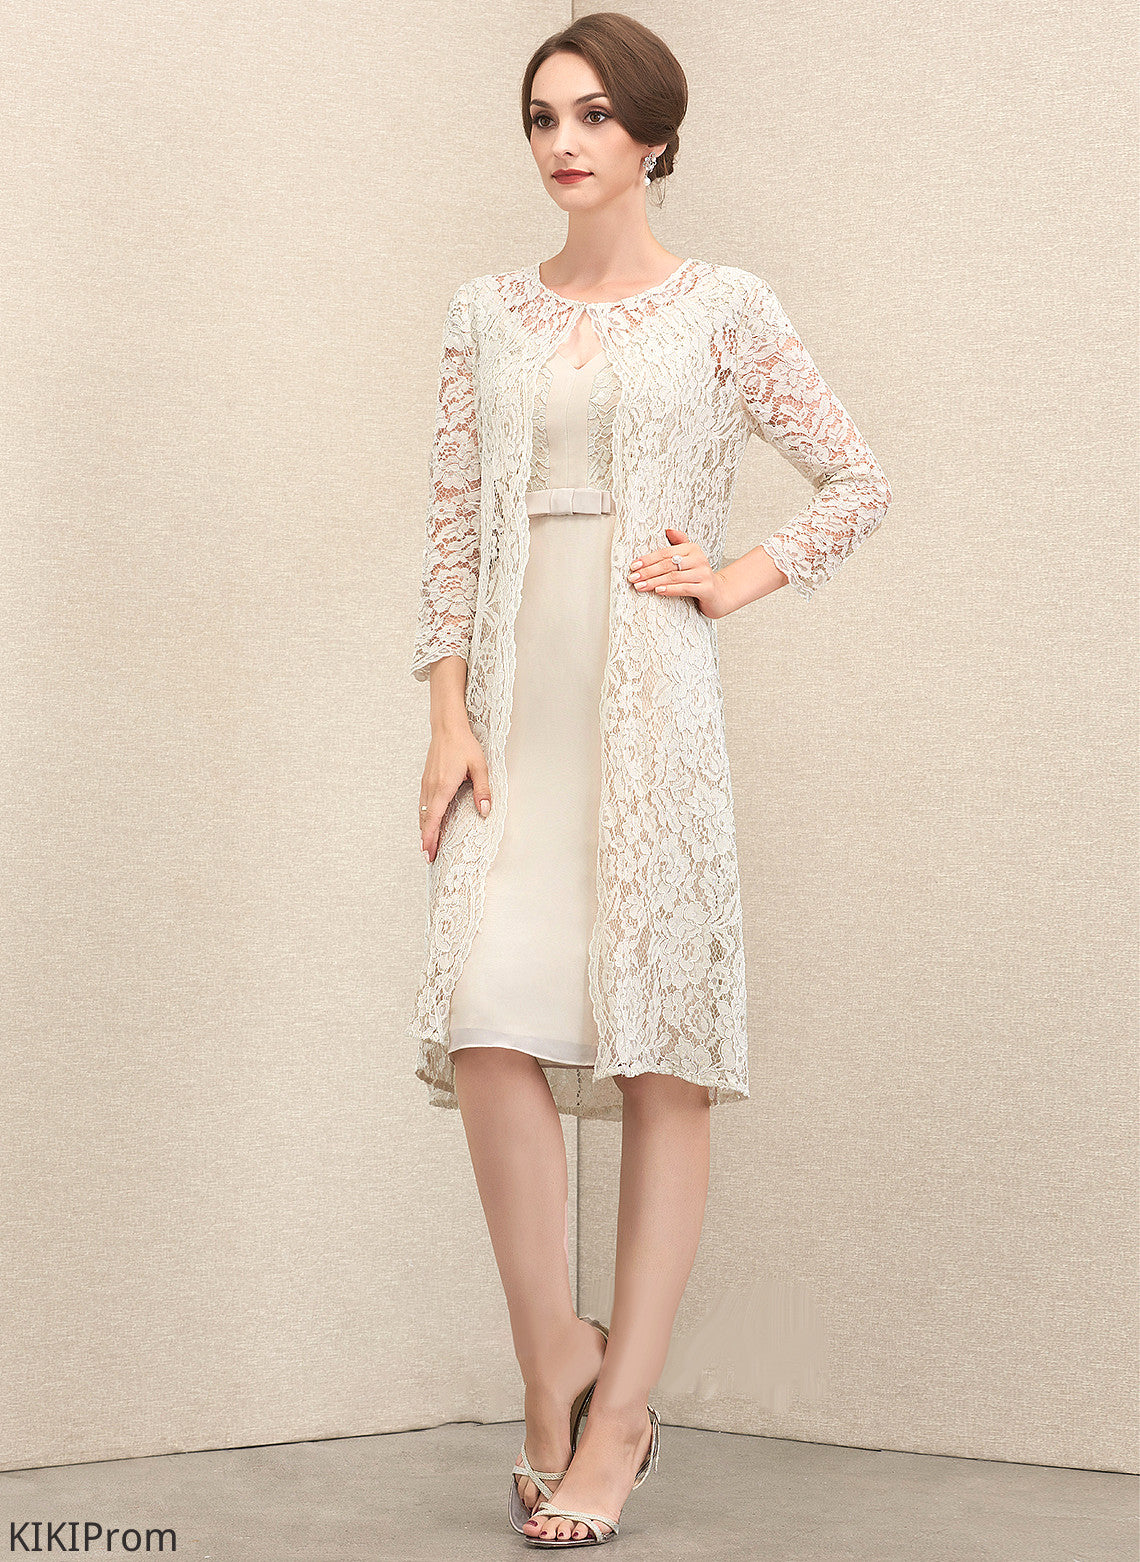 Chiffon Mother of the Bride Dresses V-neck Knee-Length the of Bow(s) Dress Sheath/Column Mother Lace With Bride Dayanara